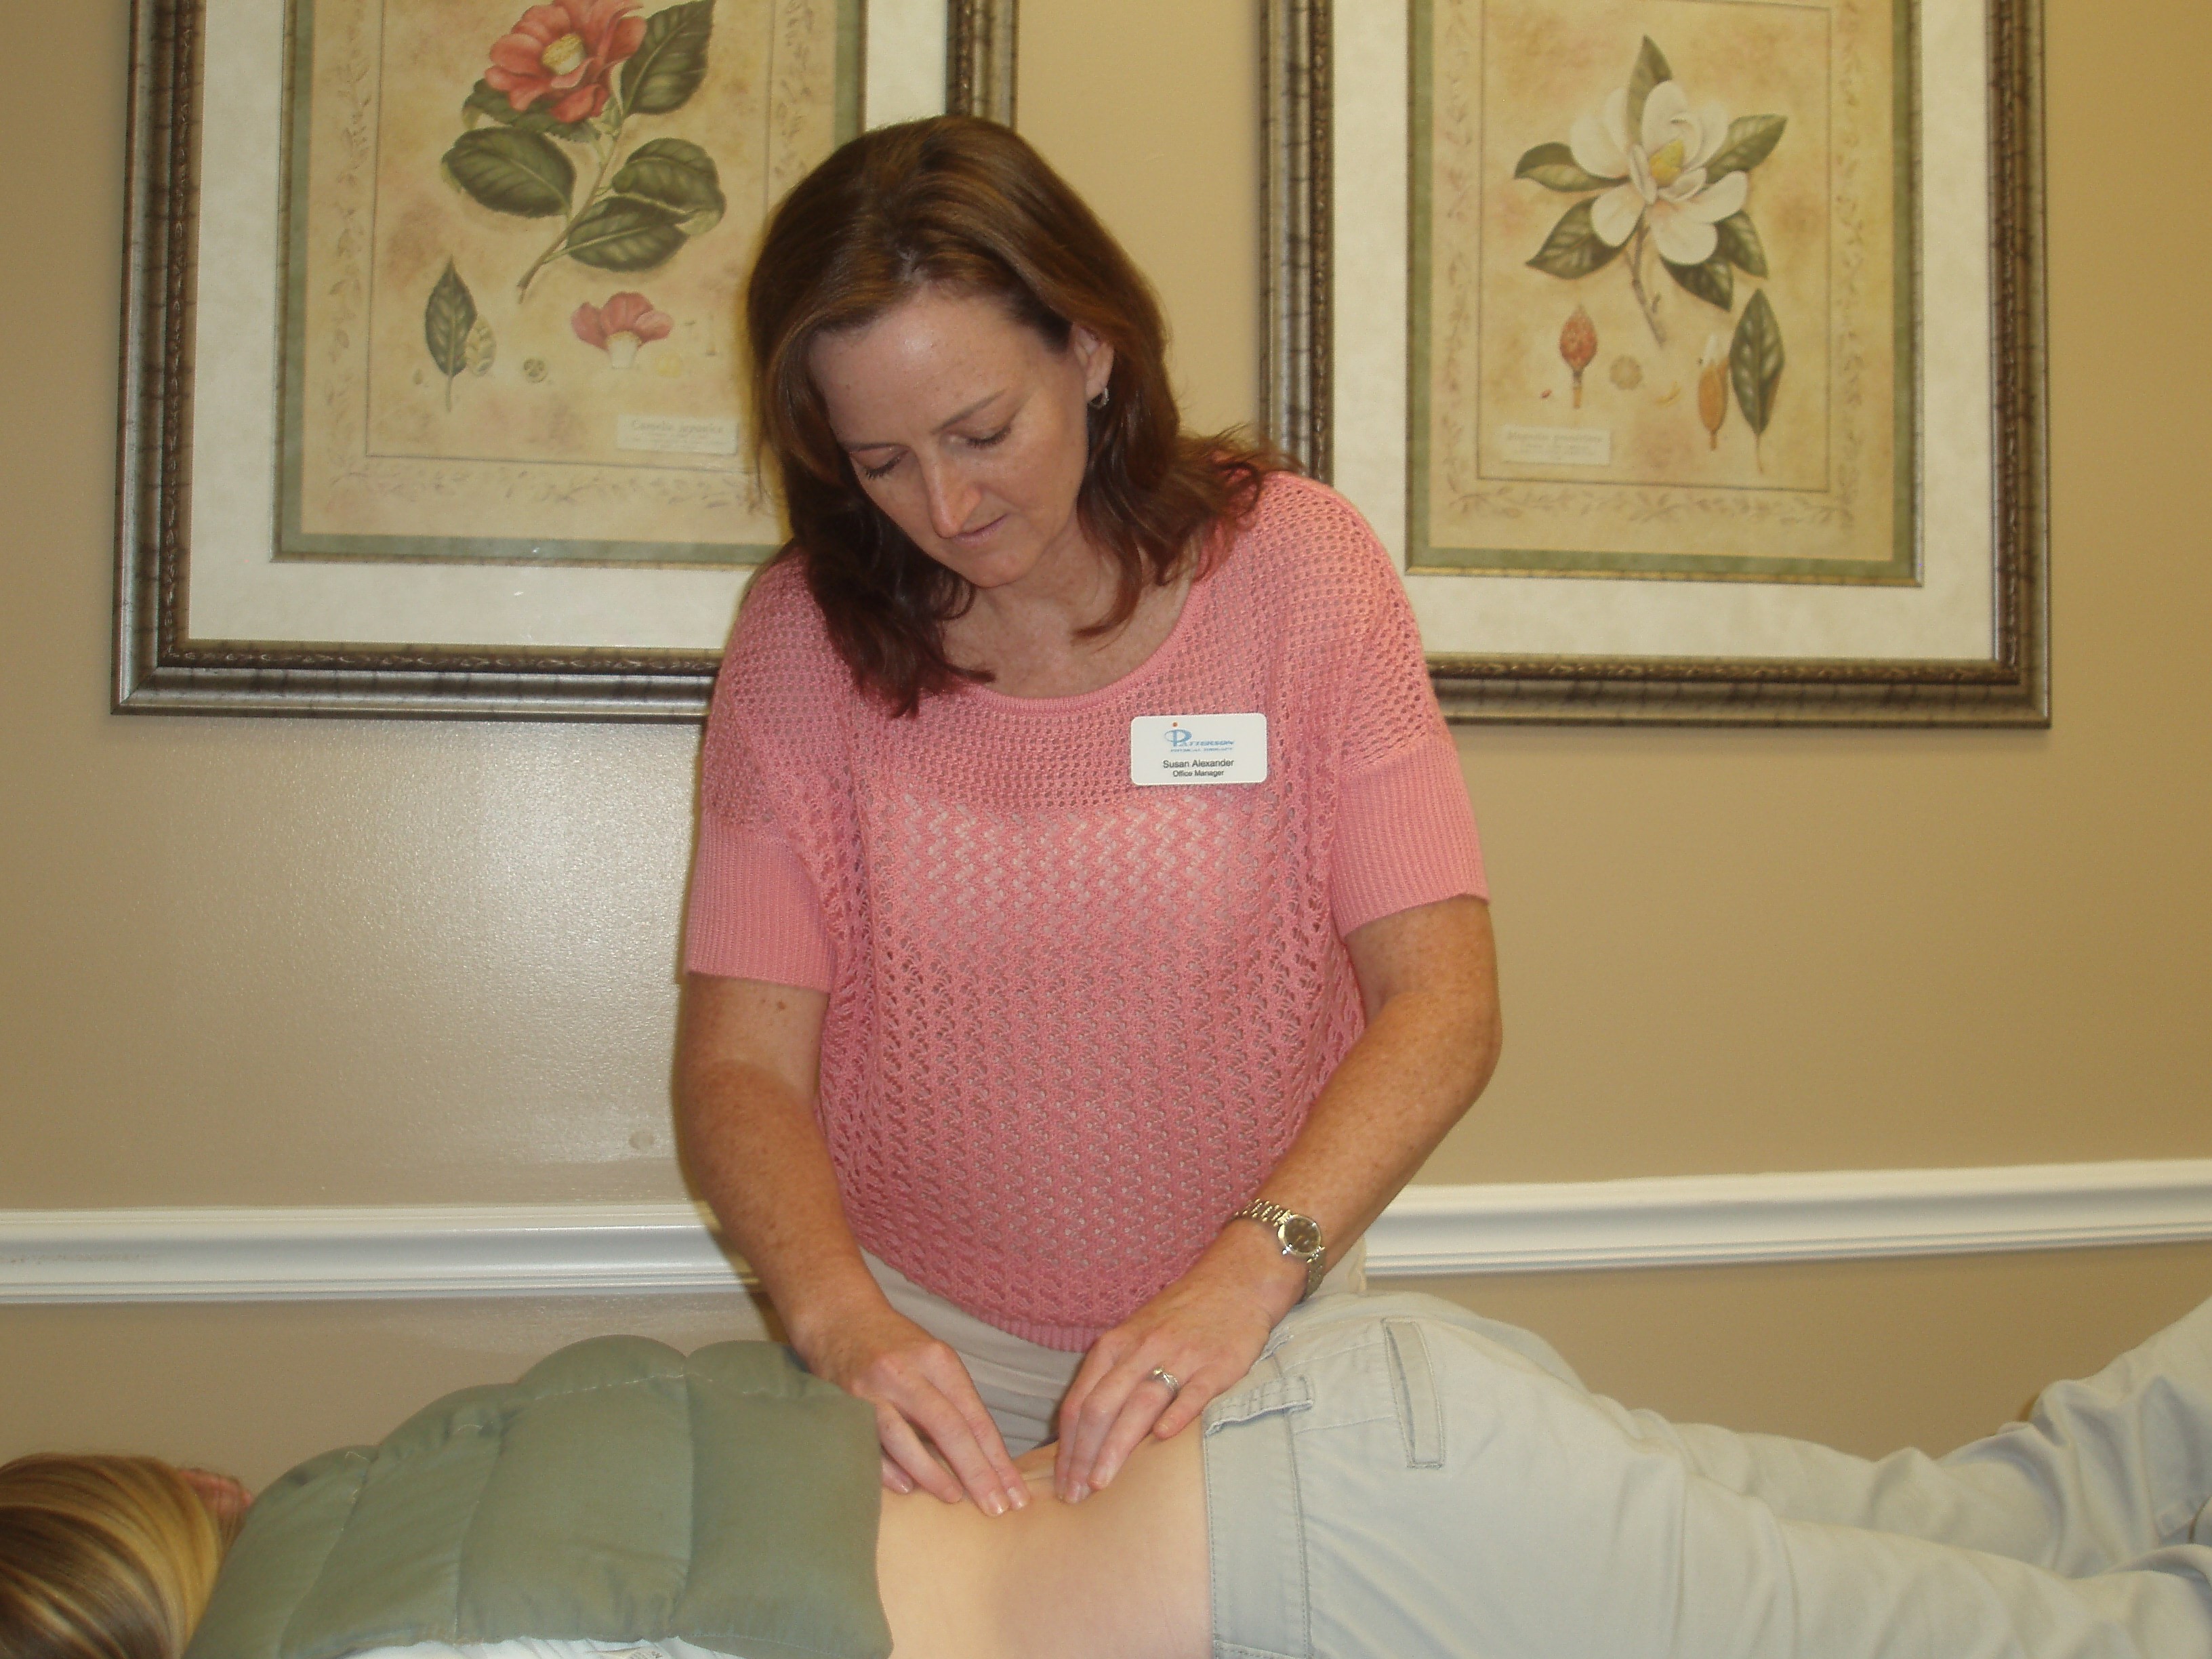 Patterson Physical Therapy believes in myofascial release techniques to help with any myofascial pain or dysfunction.